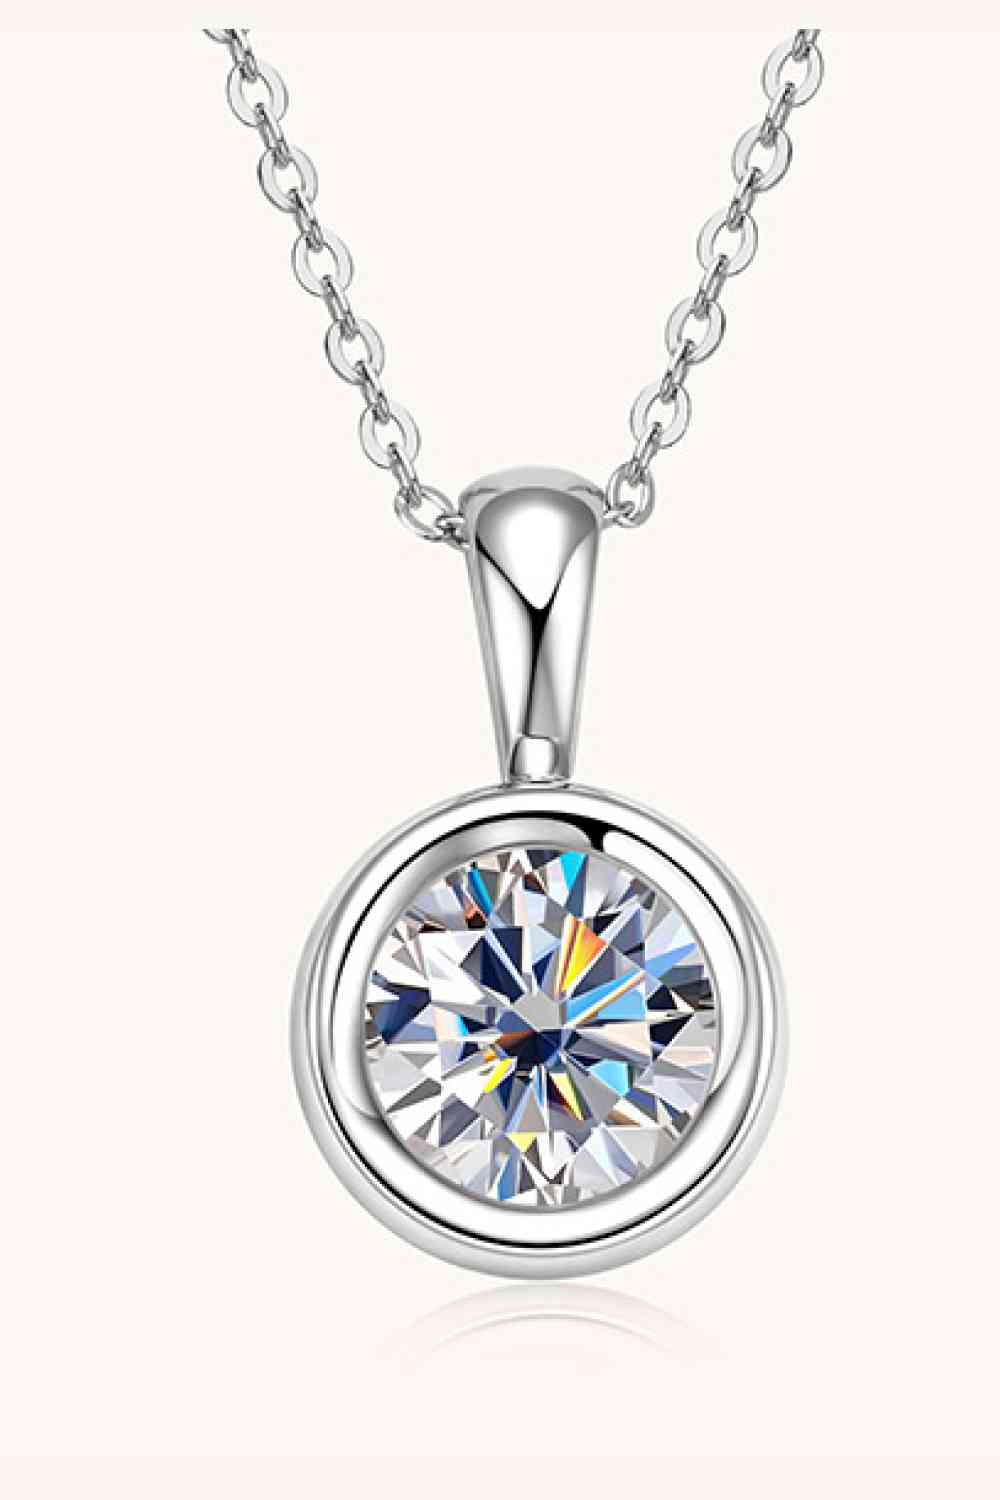 Rondell Pendant Moissanite 925 Sterling Silver Necklace (2 ct. t.w.)